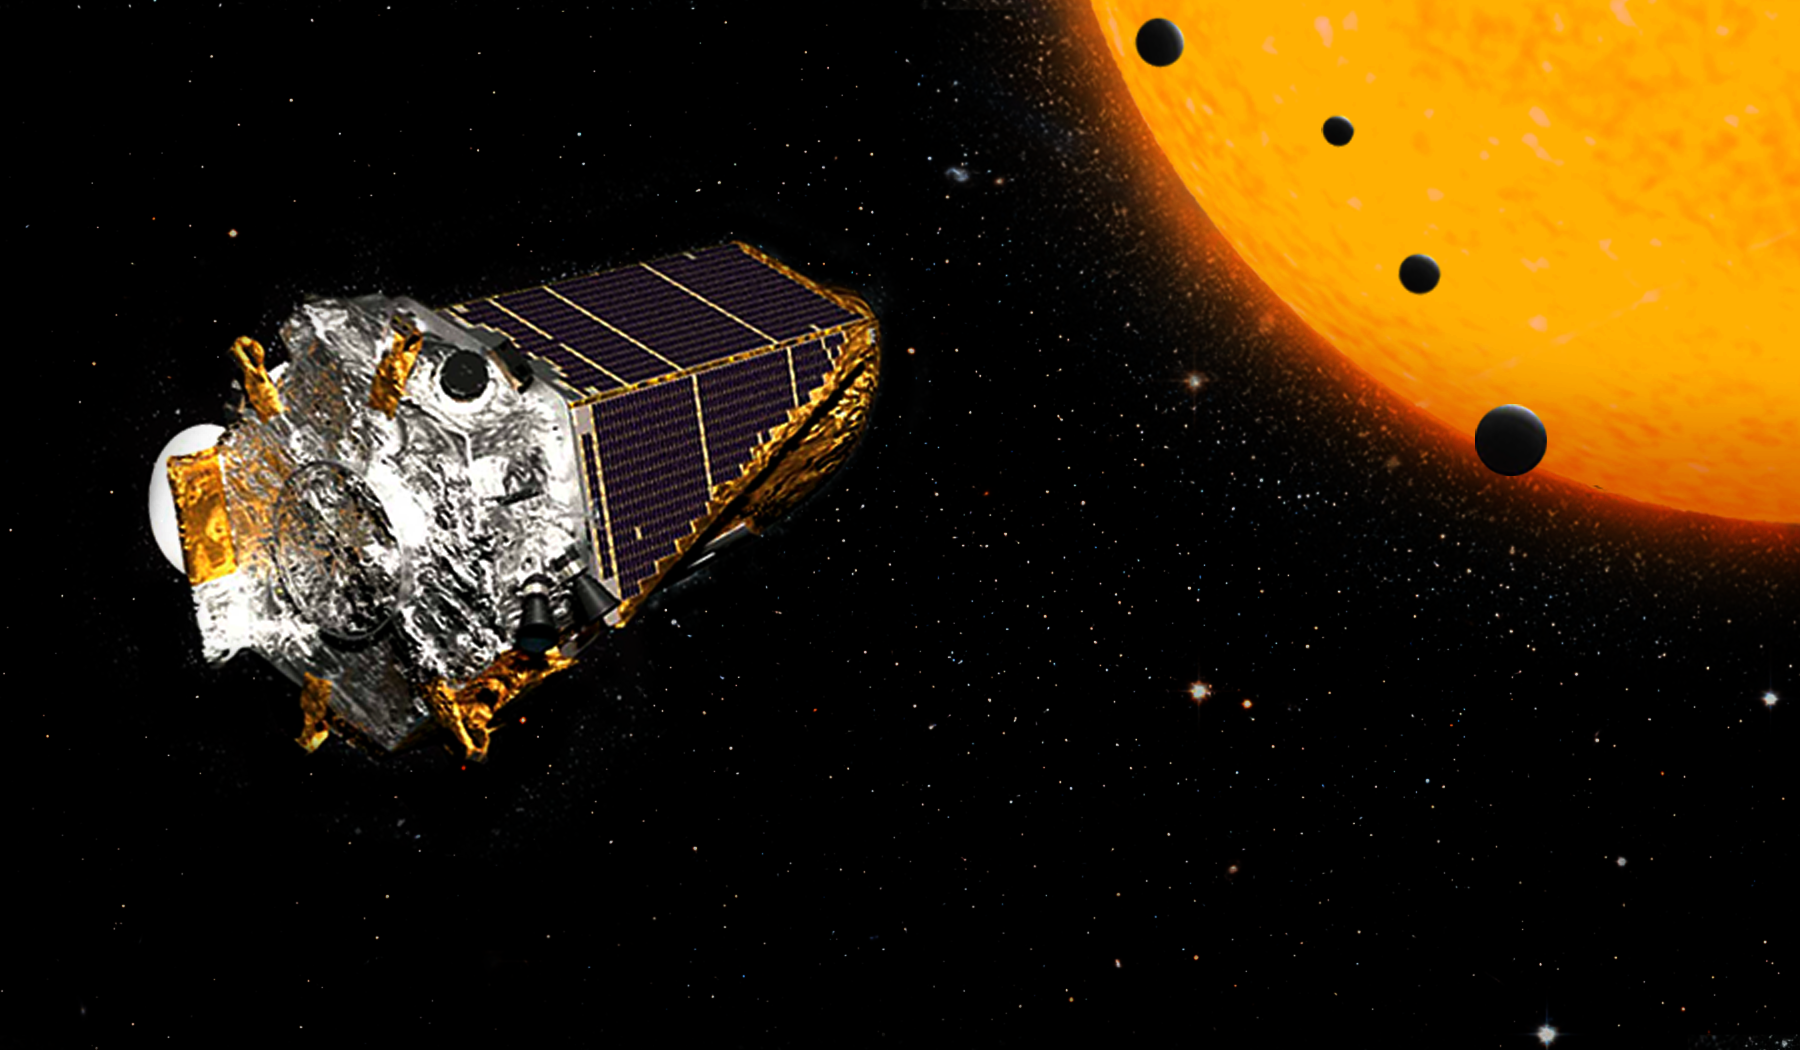 A photographic image of the NASA Kepler space telescope.